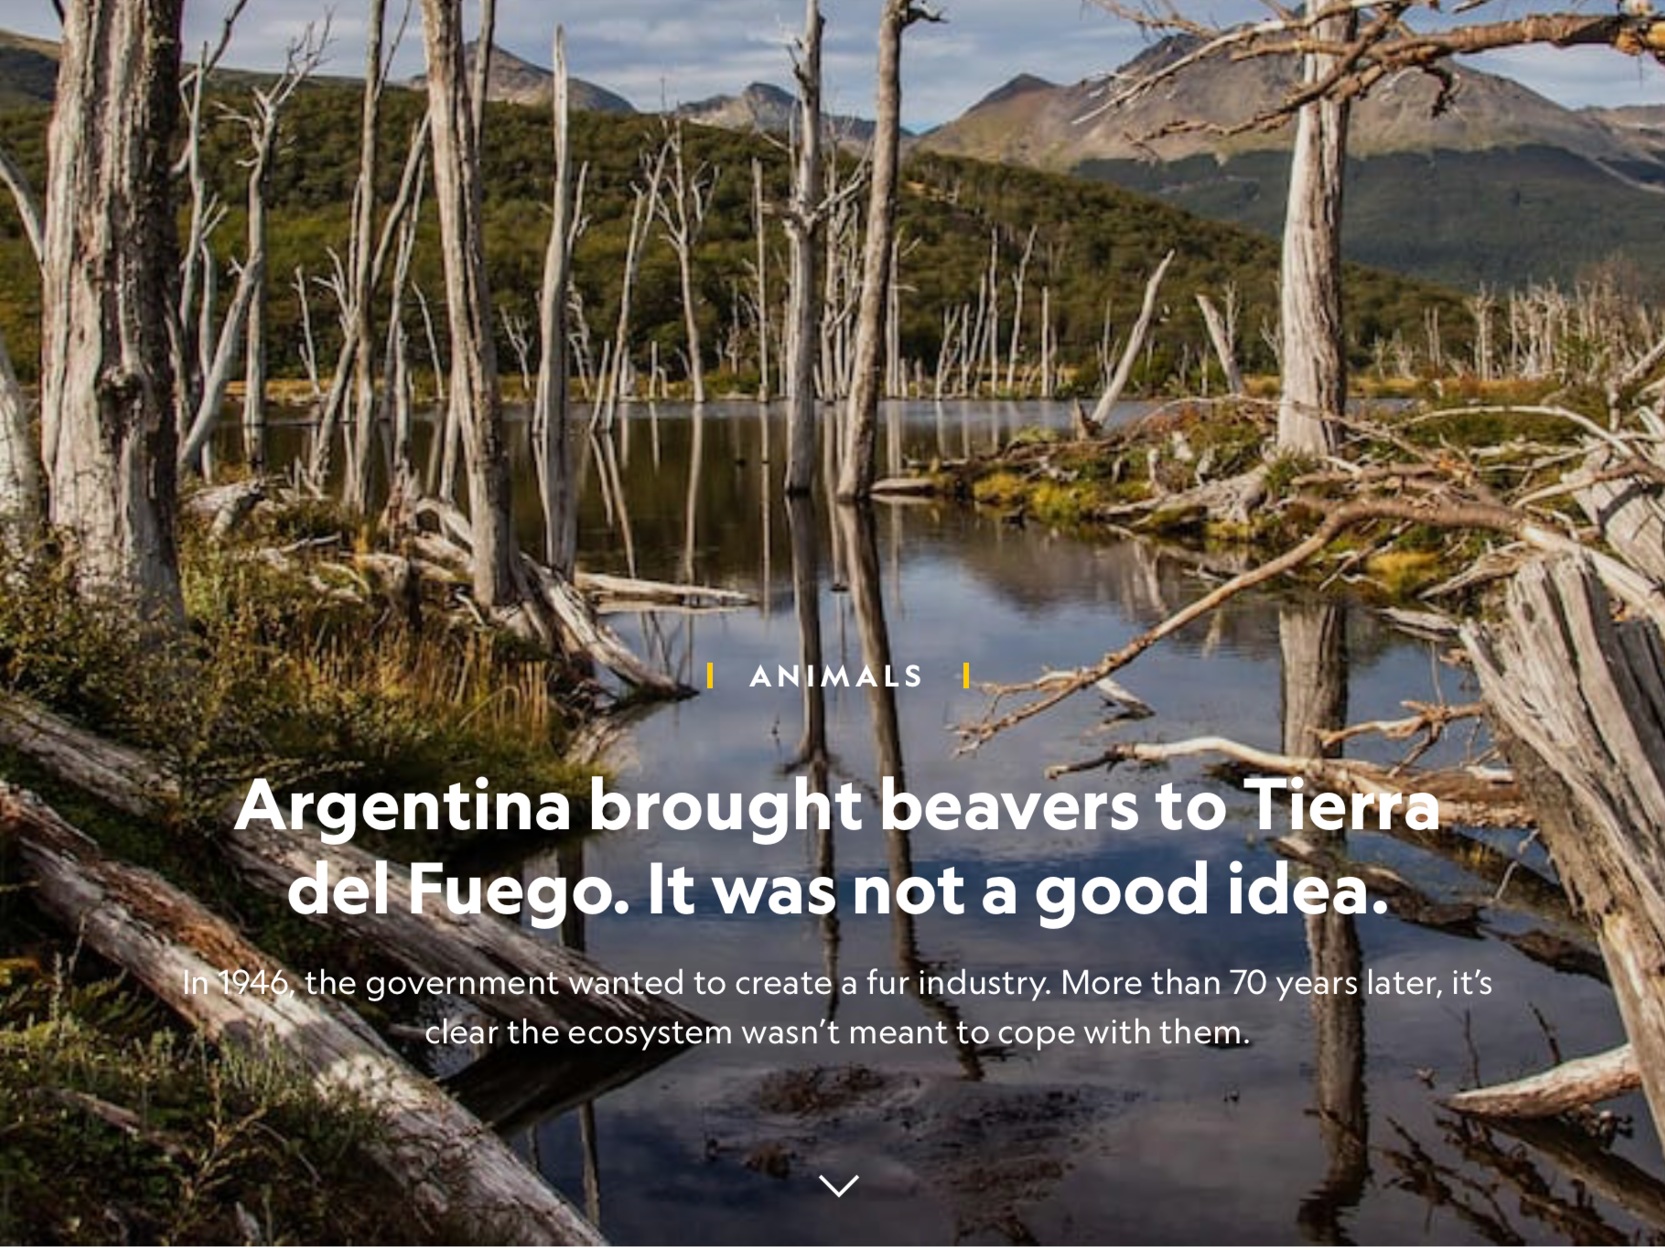 Argentina brought beavers to Argentina. It was not a good idea.